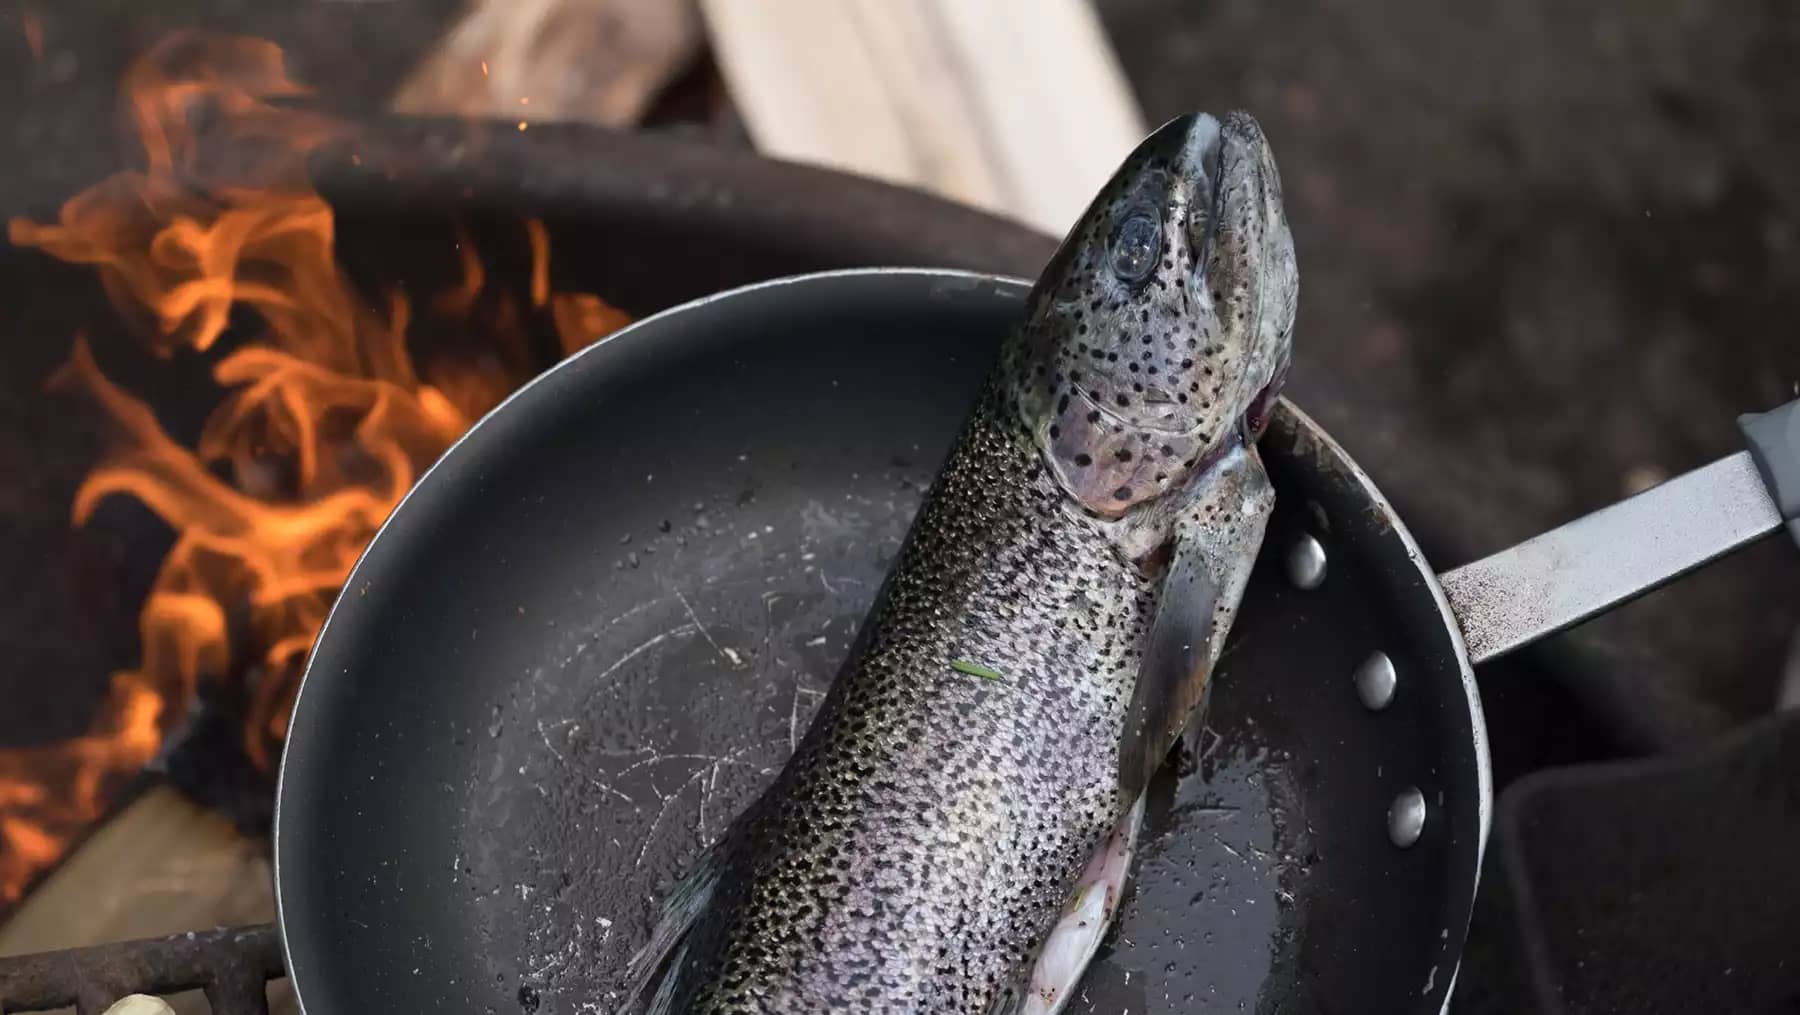 speckled trout in a frying pan over campfire